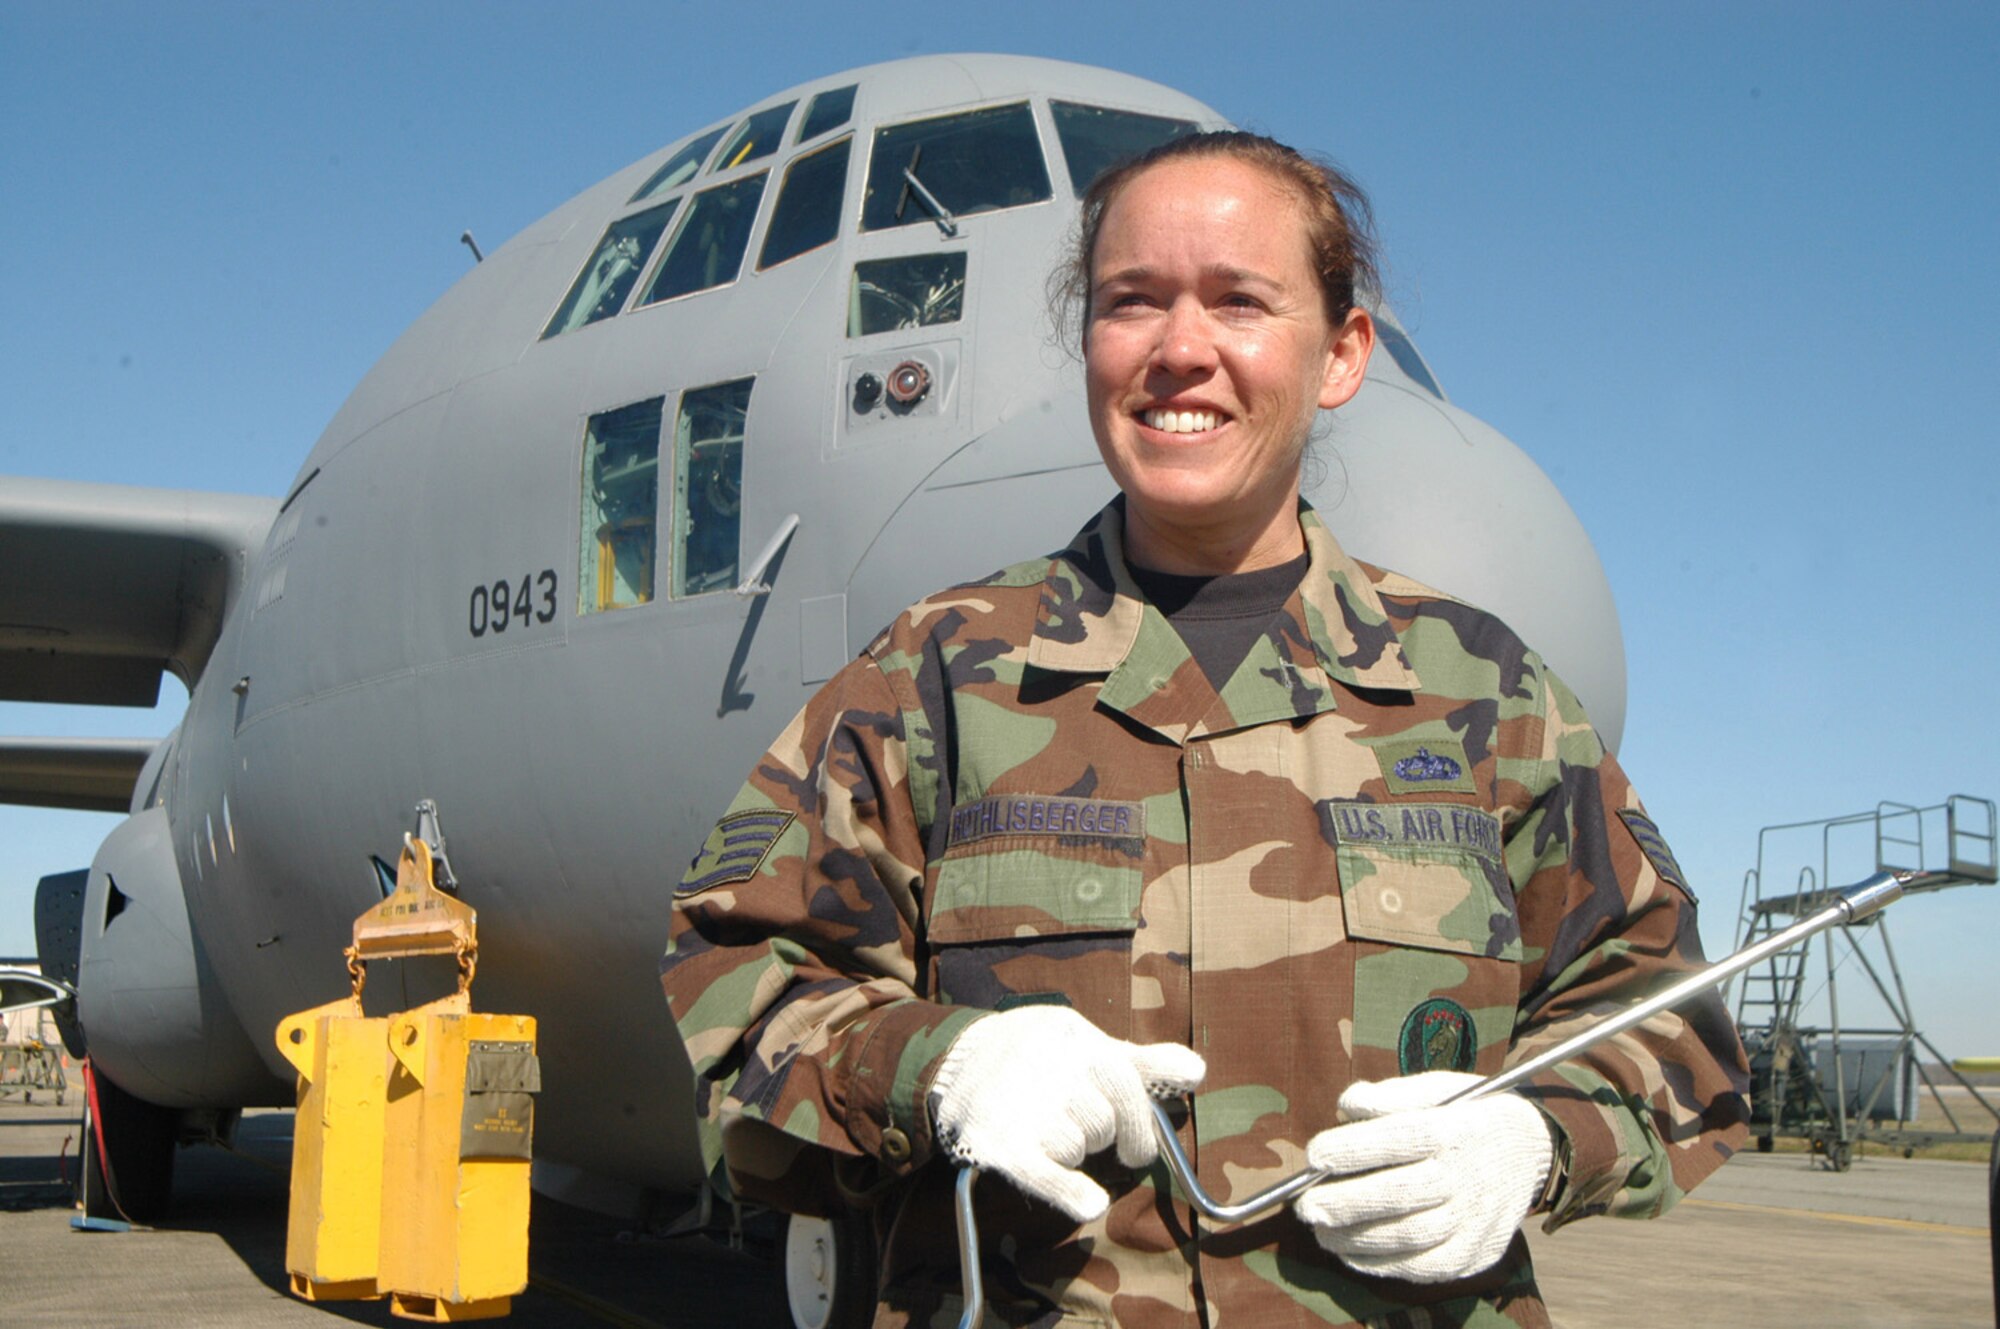 Staff Sgt. Connie Frick Rothlisberger is a C-130 crew chief with the 653rd CLSS. (Air Force photo by Sue Sapp)